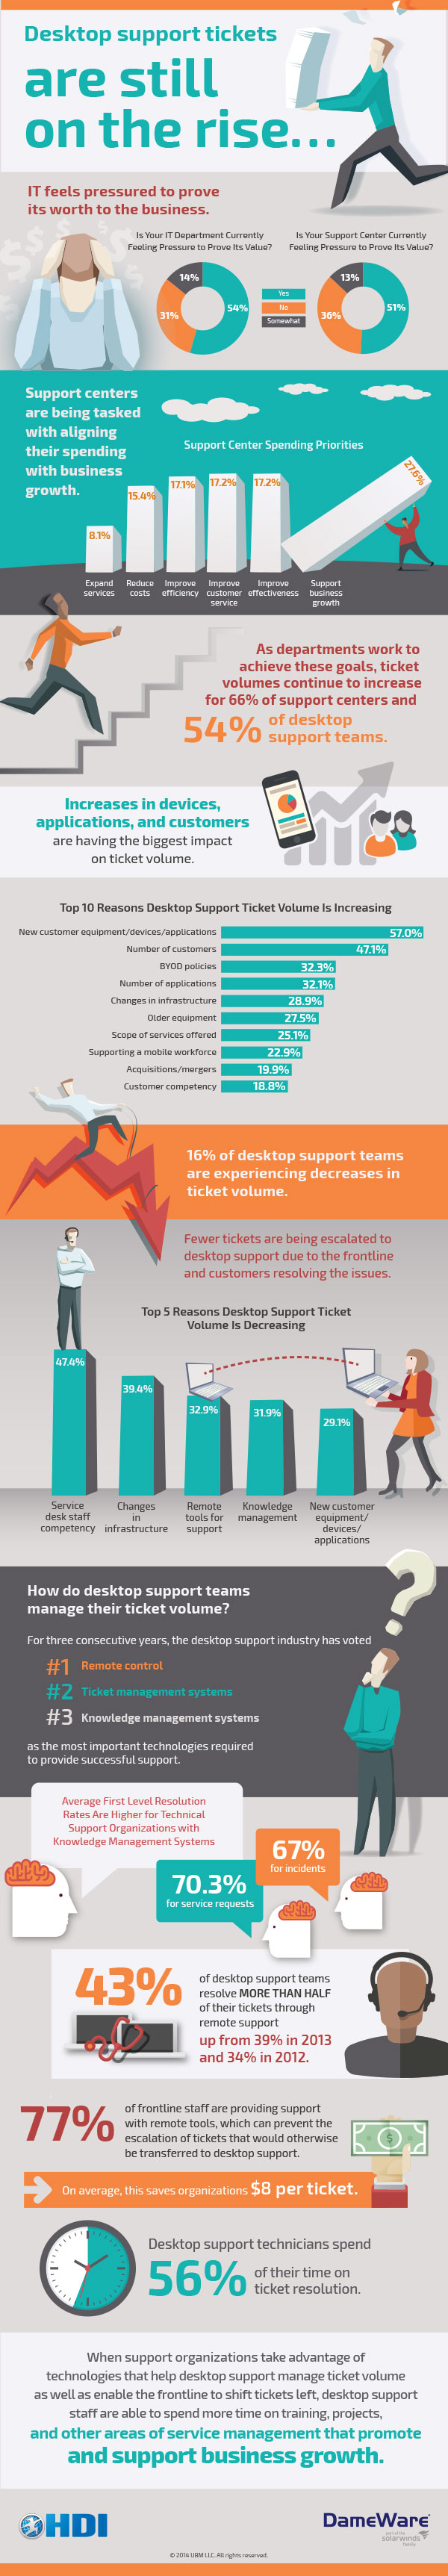 Desktop Technical Support Ticket Volume Still on the Rise (Infographic) | Mobile PC Medics